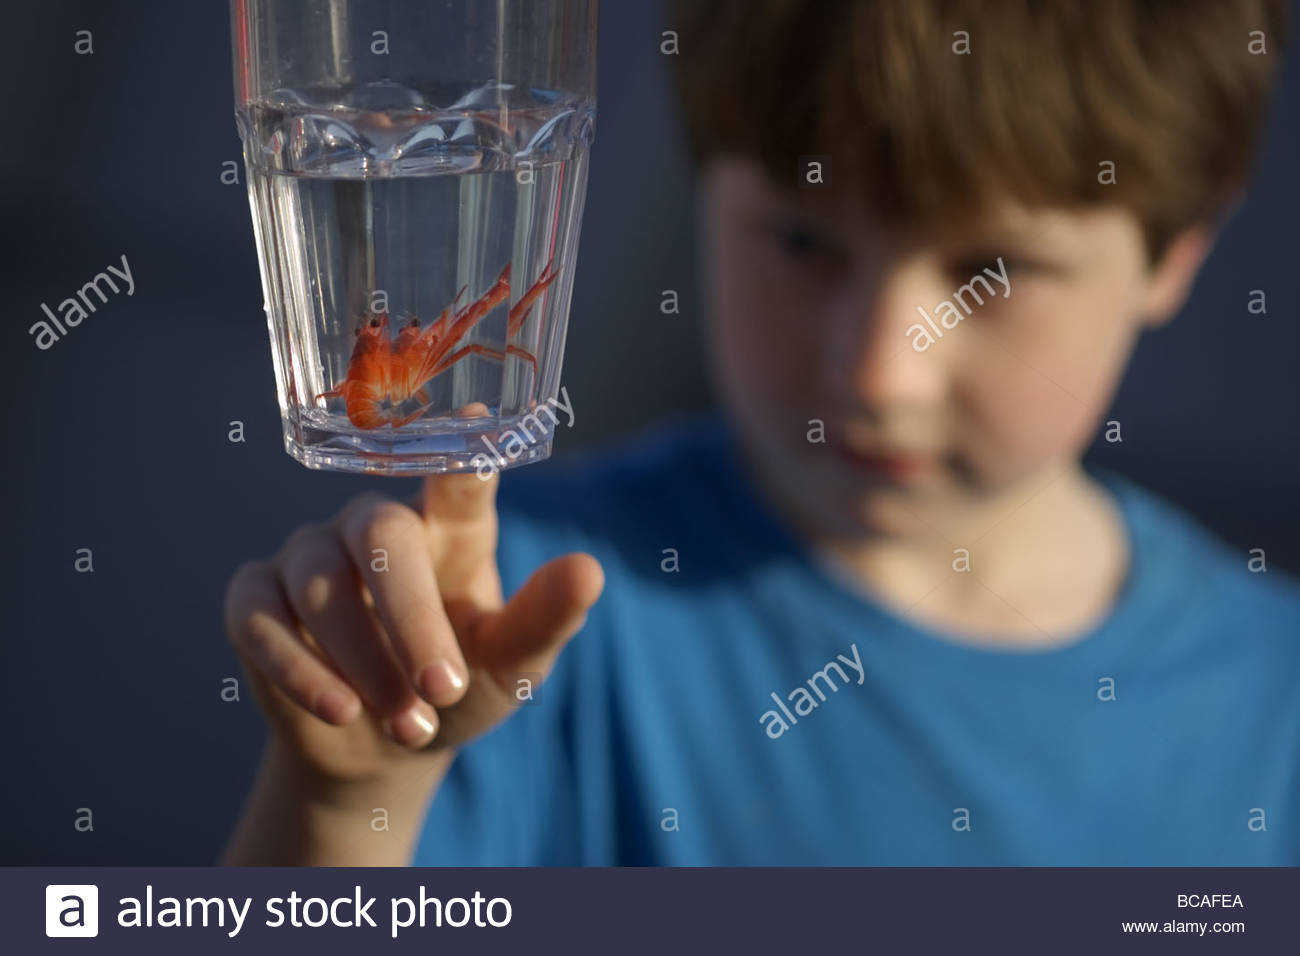 Curious young boy and pelagic red crab. Stock Photo